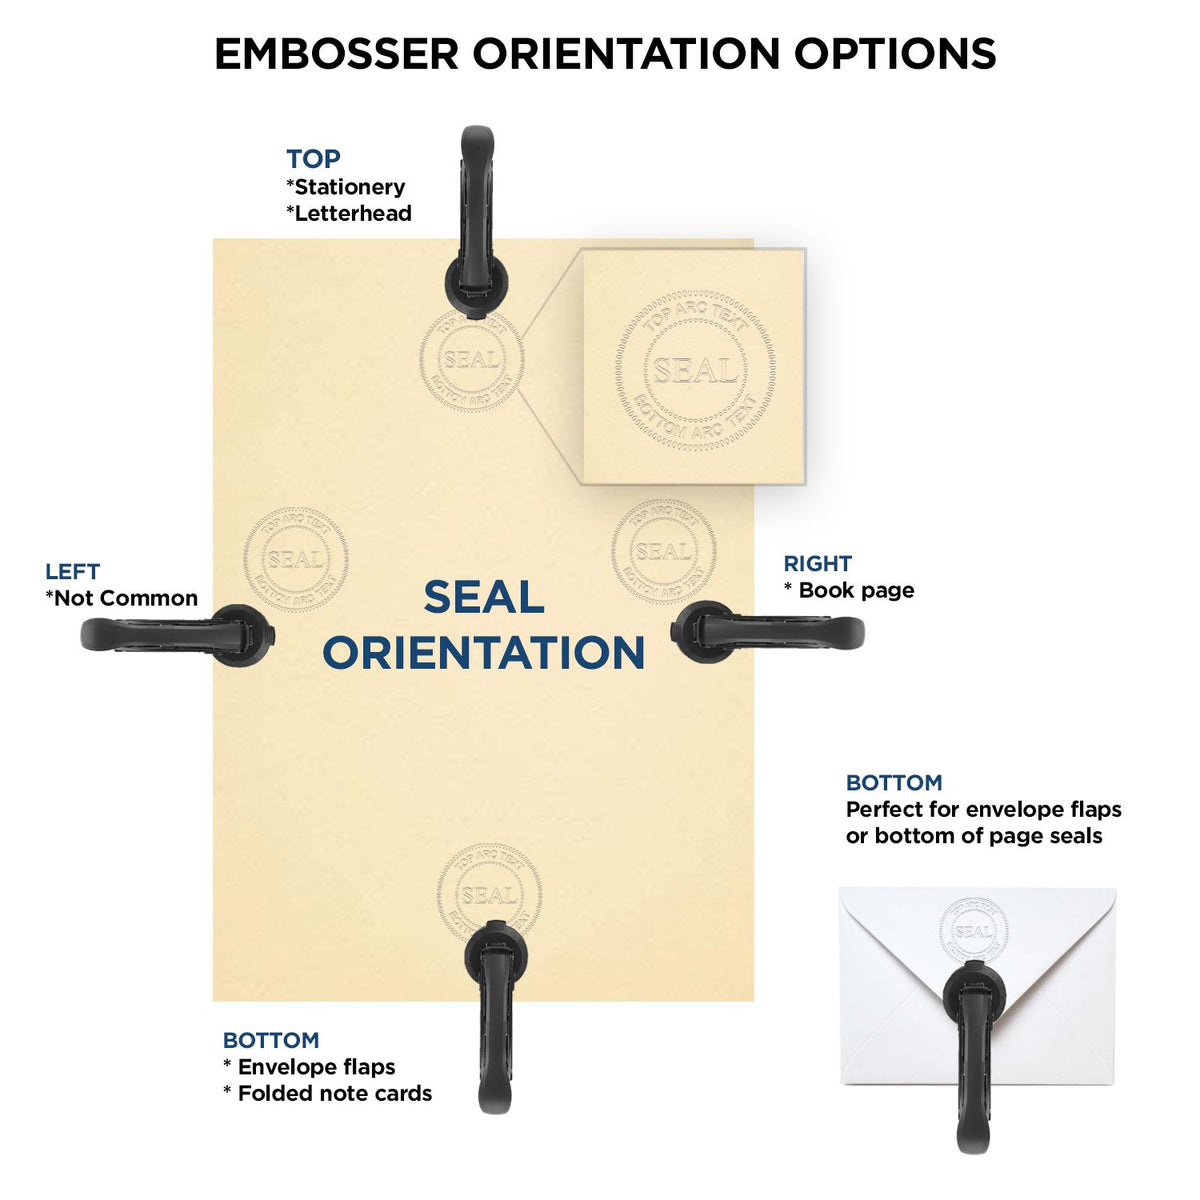 An infographic for the Soft Rhode Island Professional Engineer Seal showing embosser orientation, this is showing examples of a top, bottom, right and left insert.